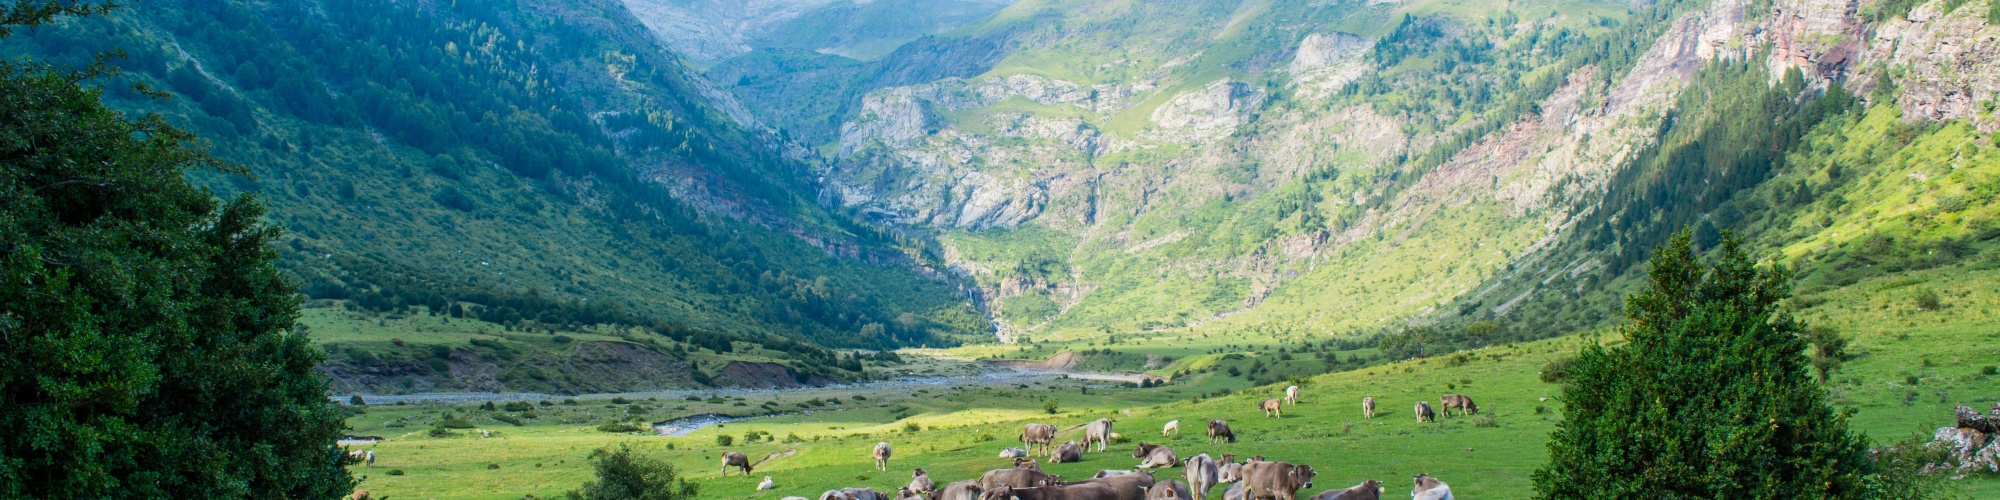 A herd of cows grazes in a green valley surrounded by mountains. Photo by Juan Pablo Guzmán via Pexels.